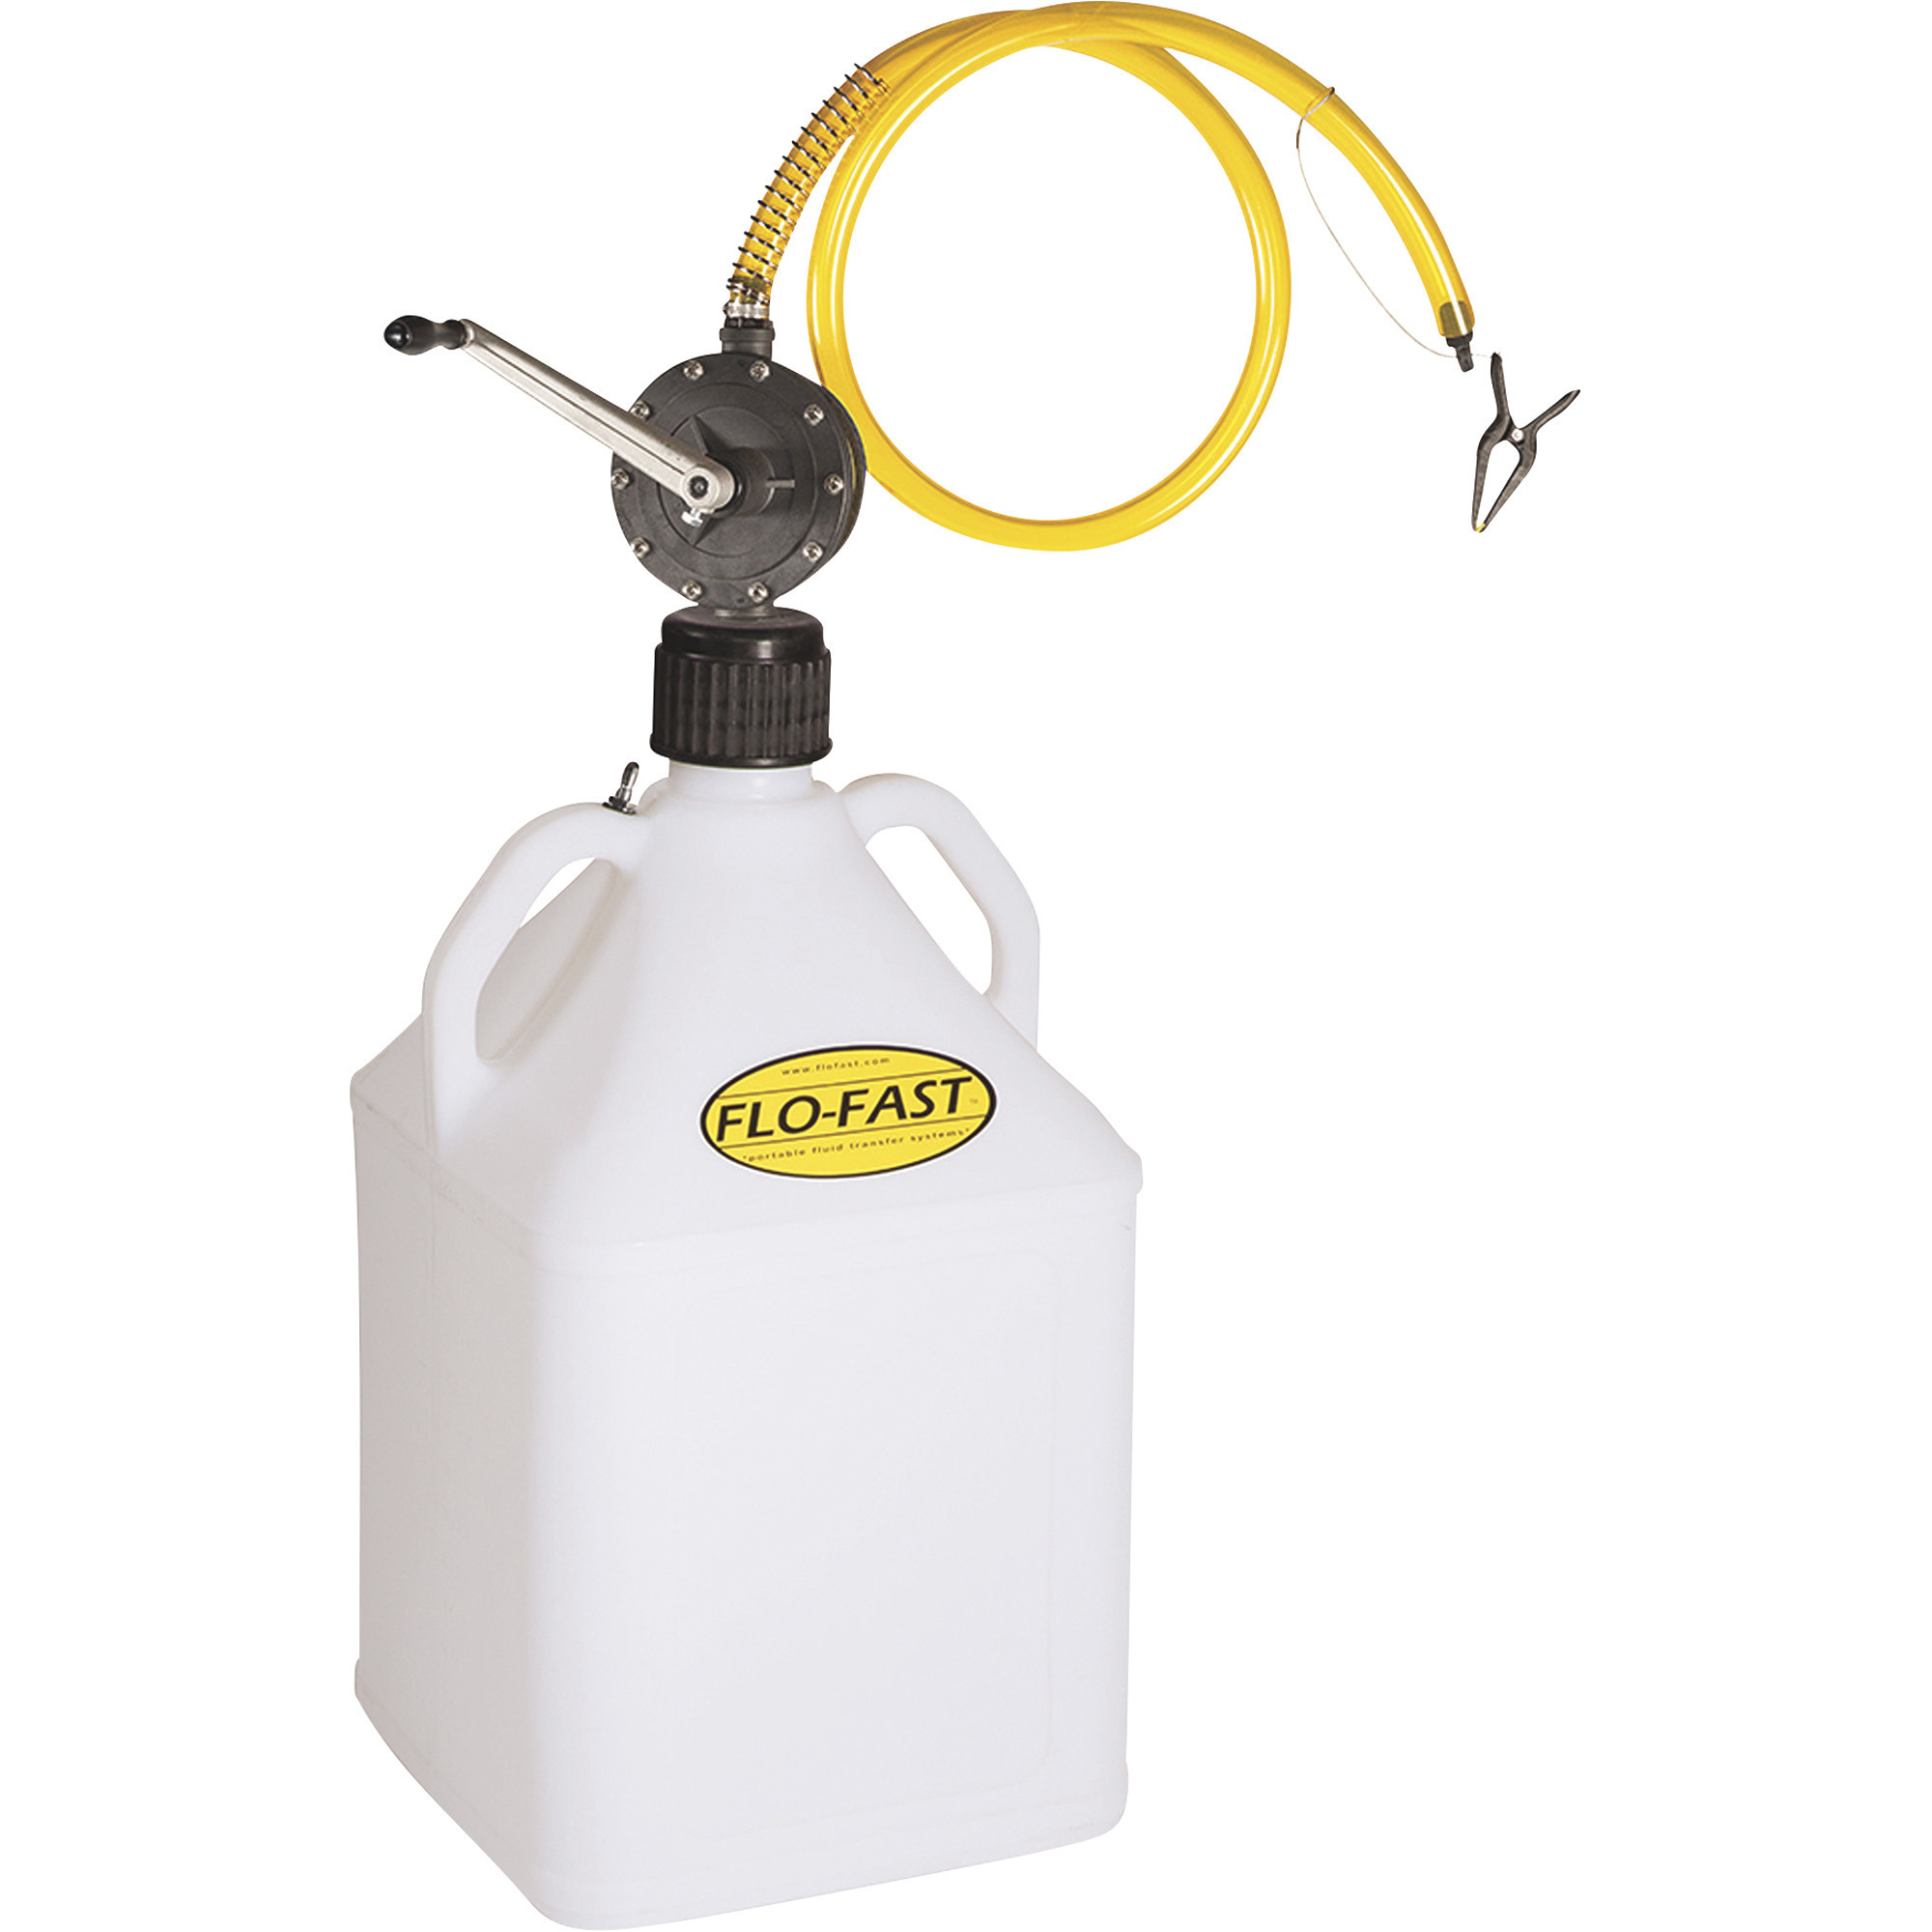 FLO-FAST Container With Pump, 15-Gallon, Natural, For Chemicals and Hazmat Fluids, Model 31005-N